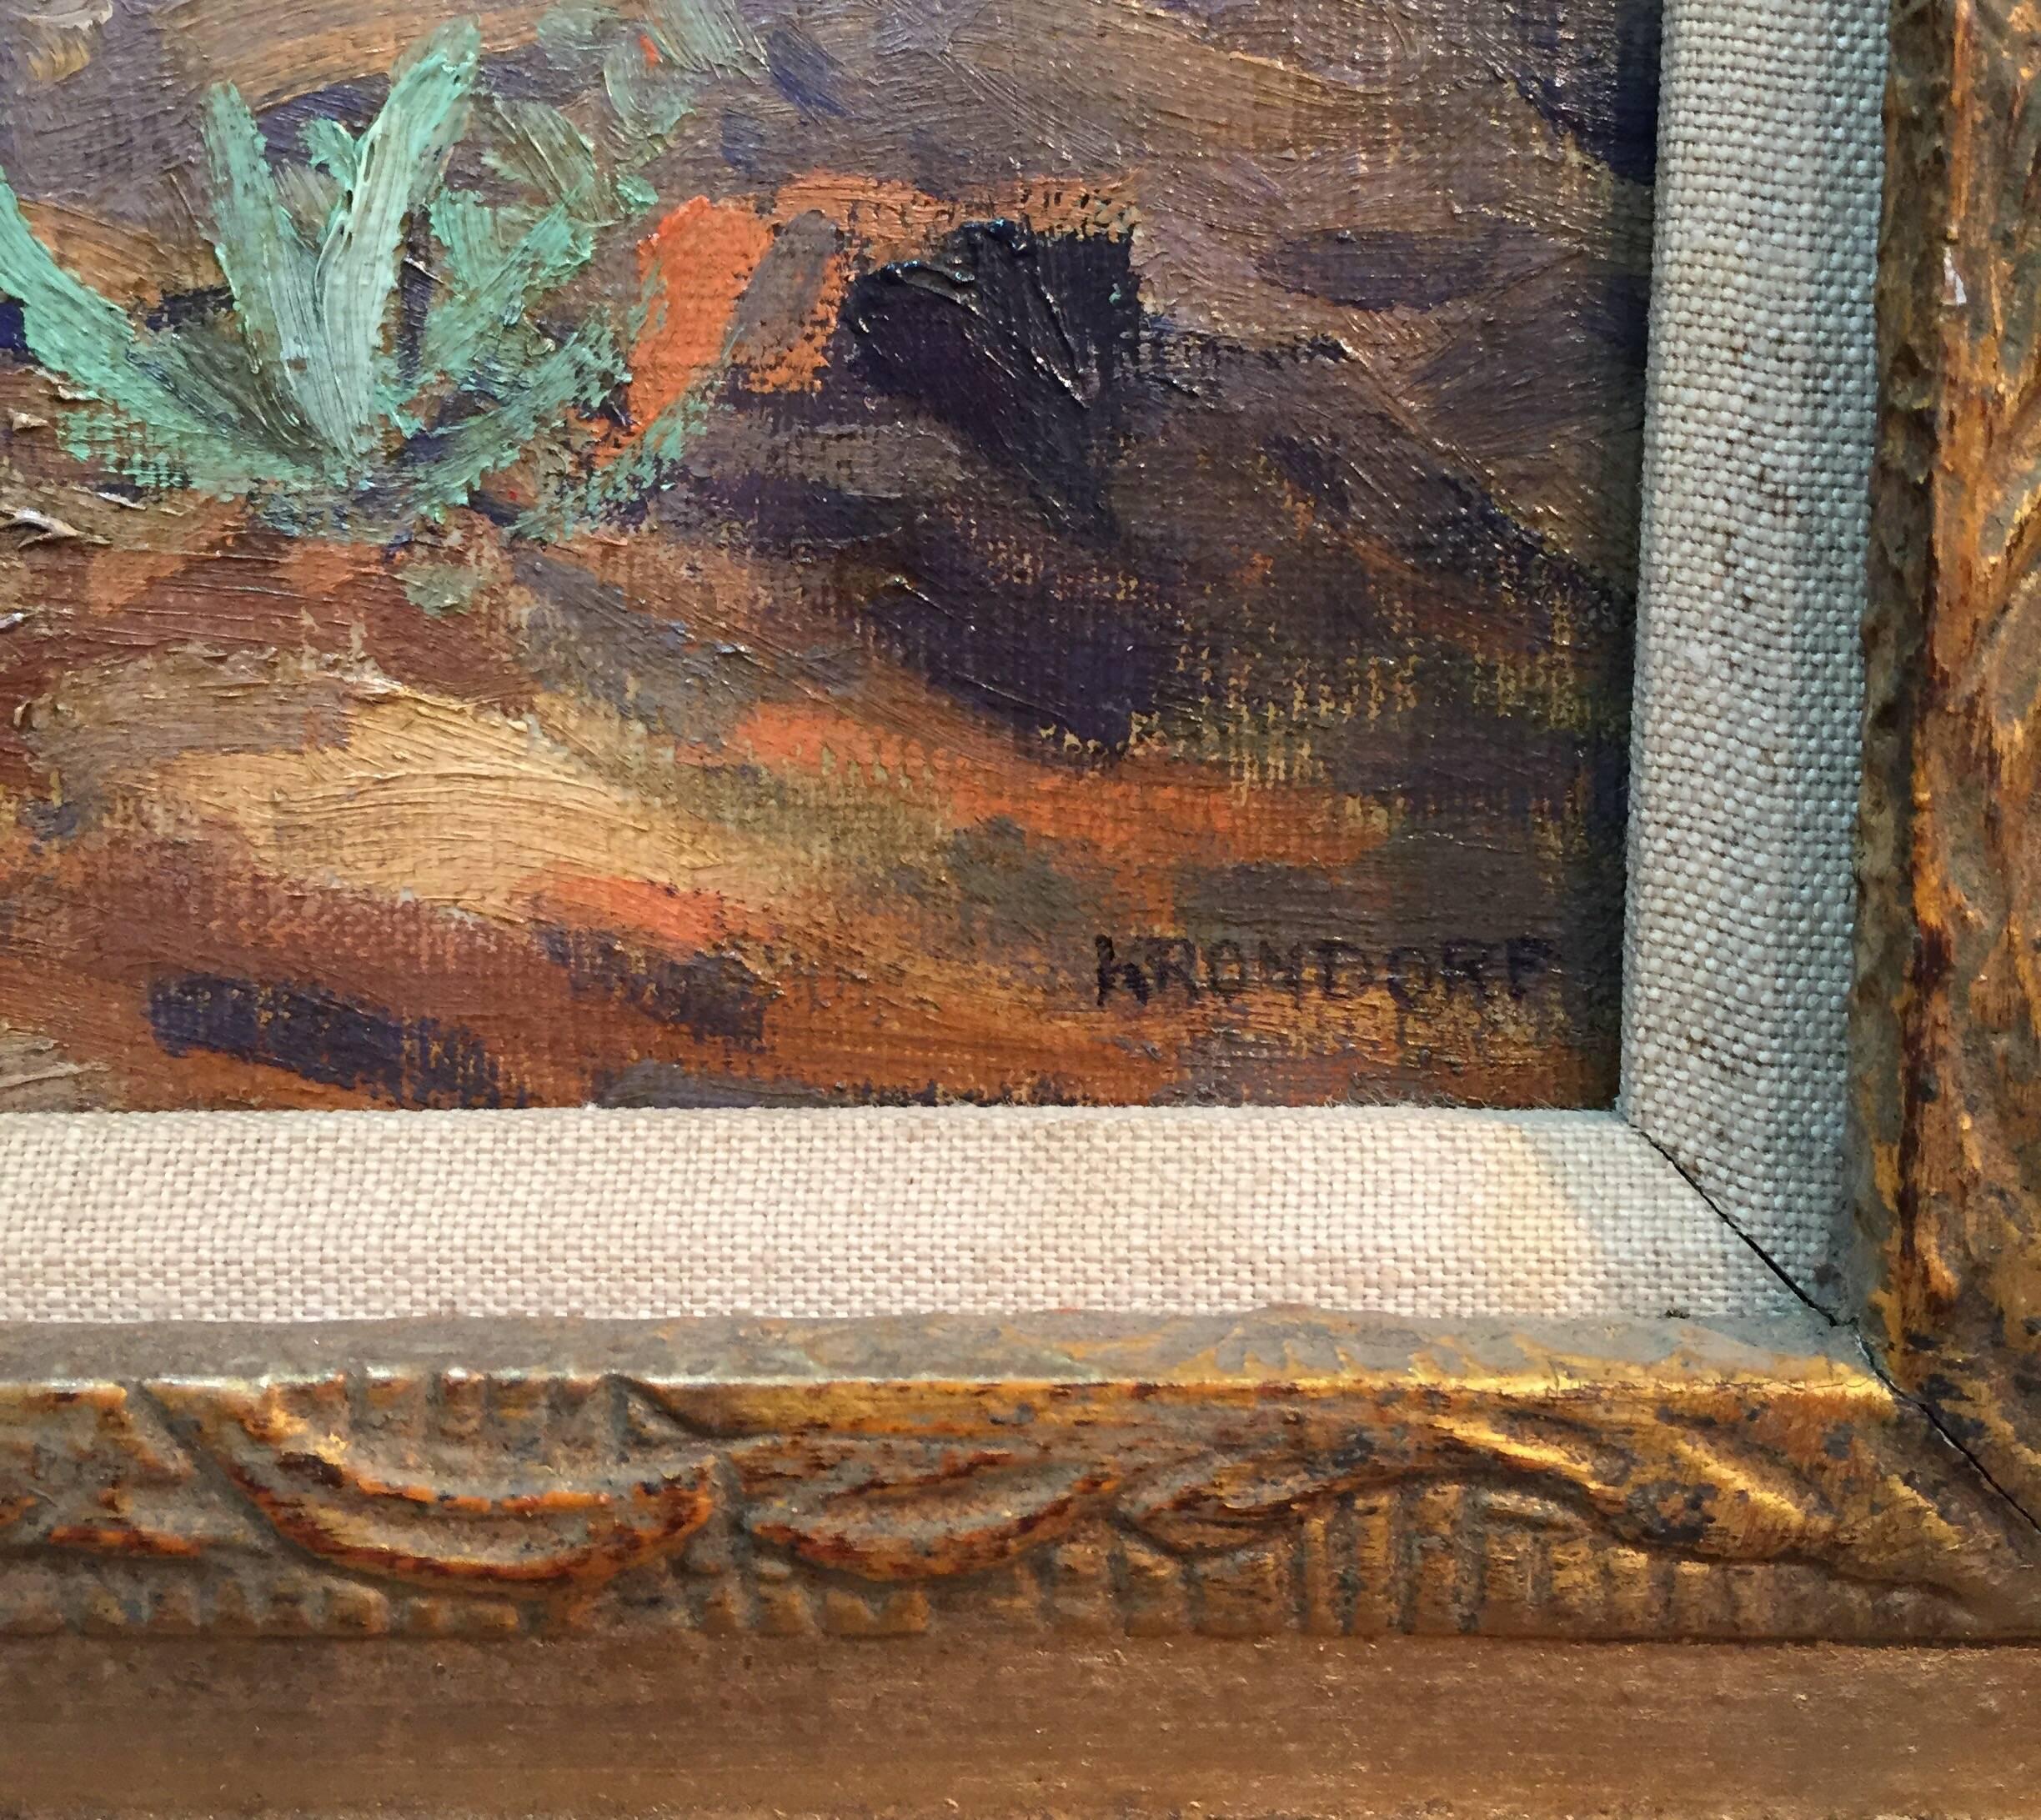 Oil on canvas, signed lower right, Krondorf. 

Most likely the original frame.